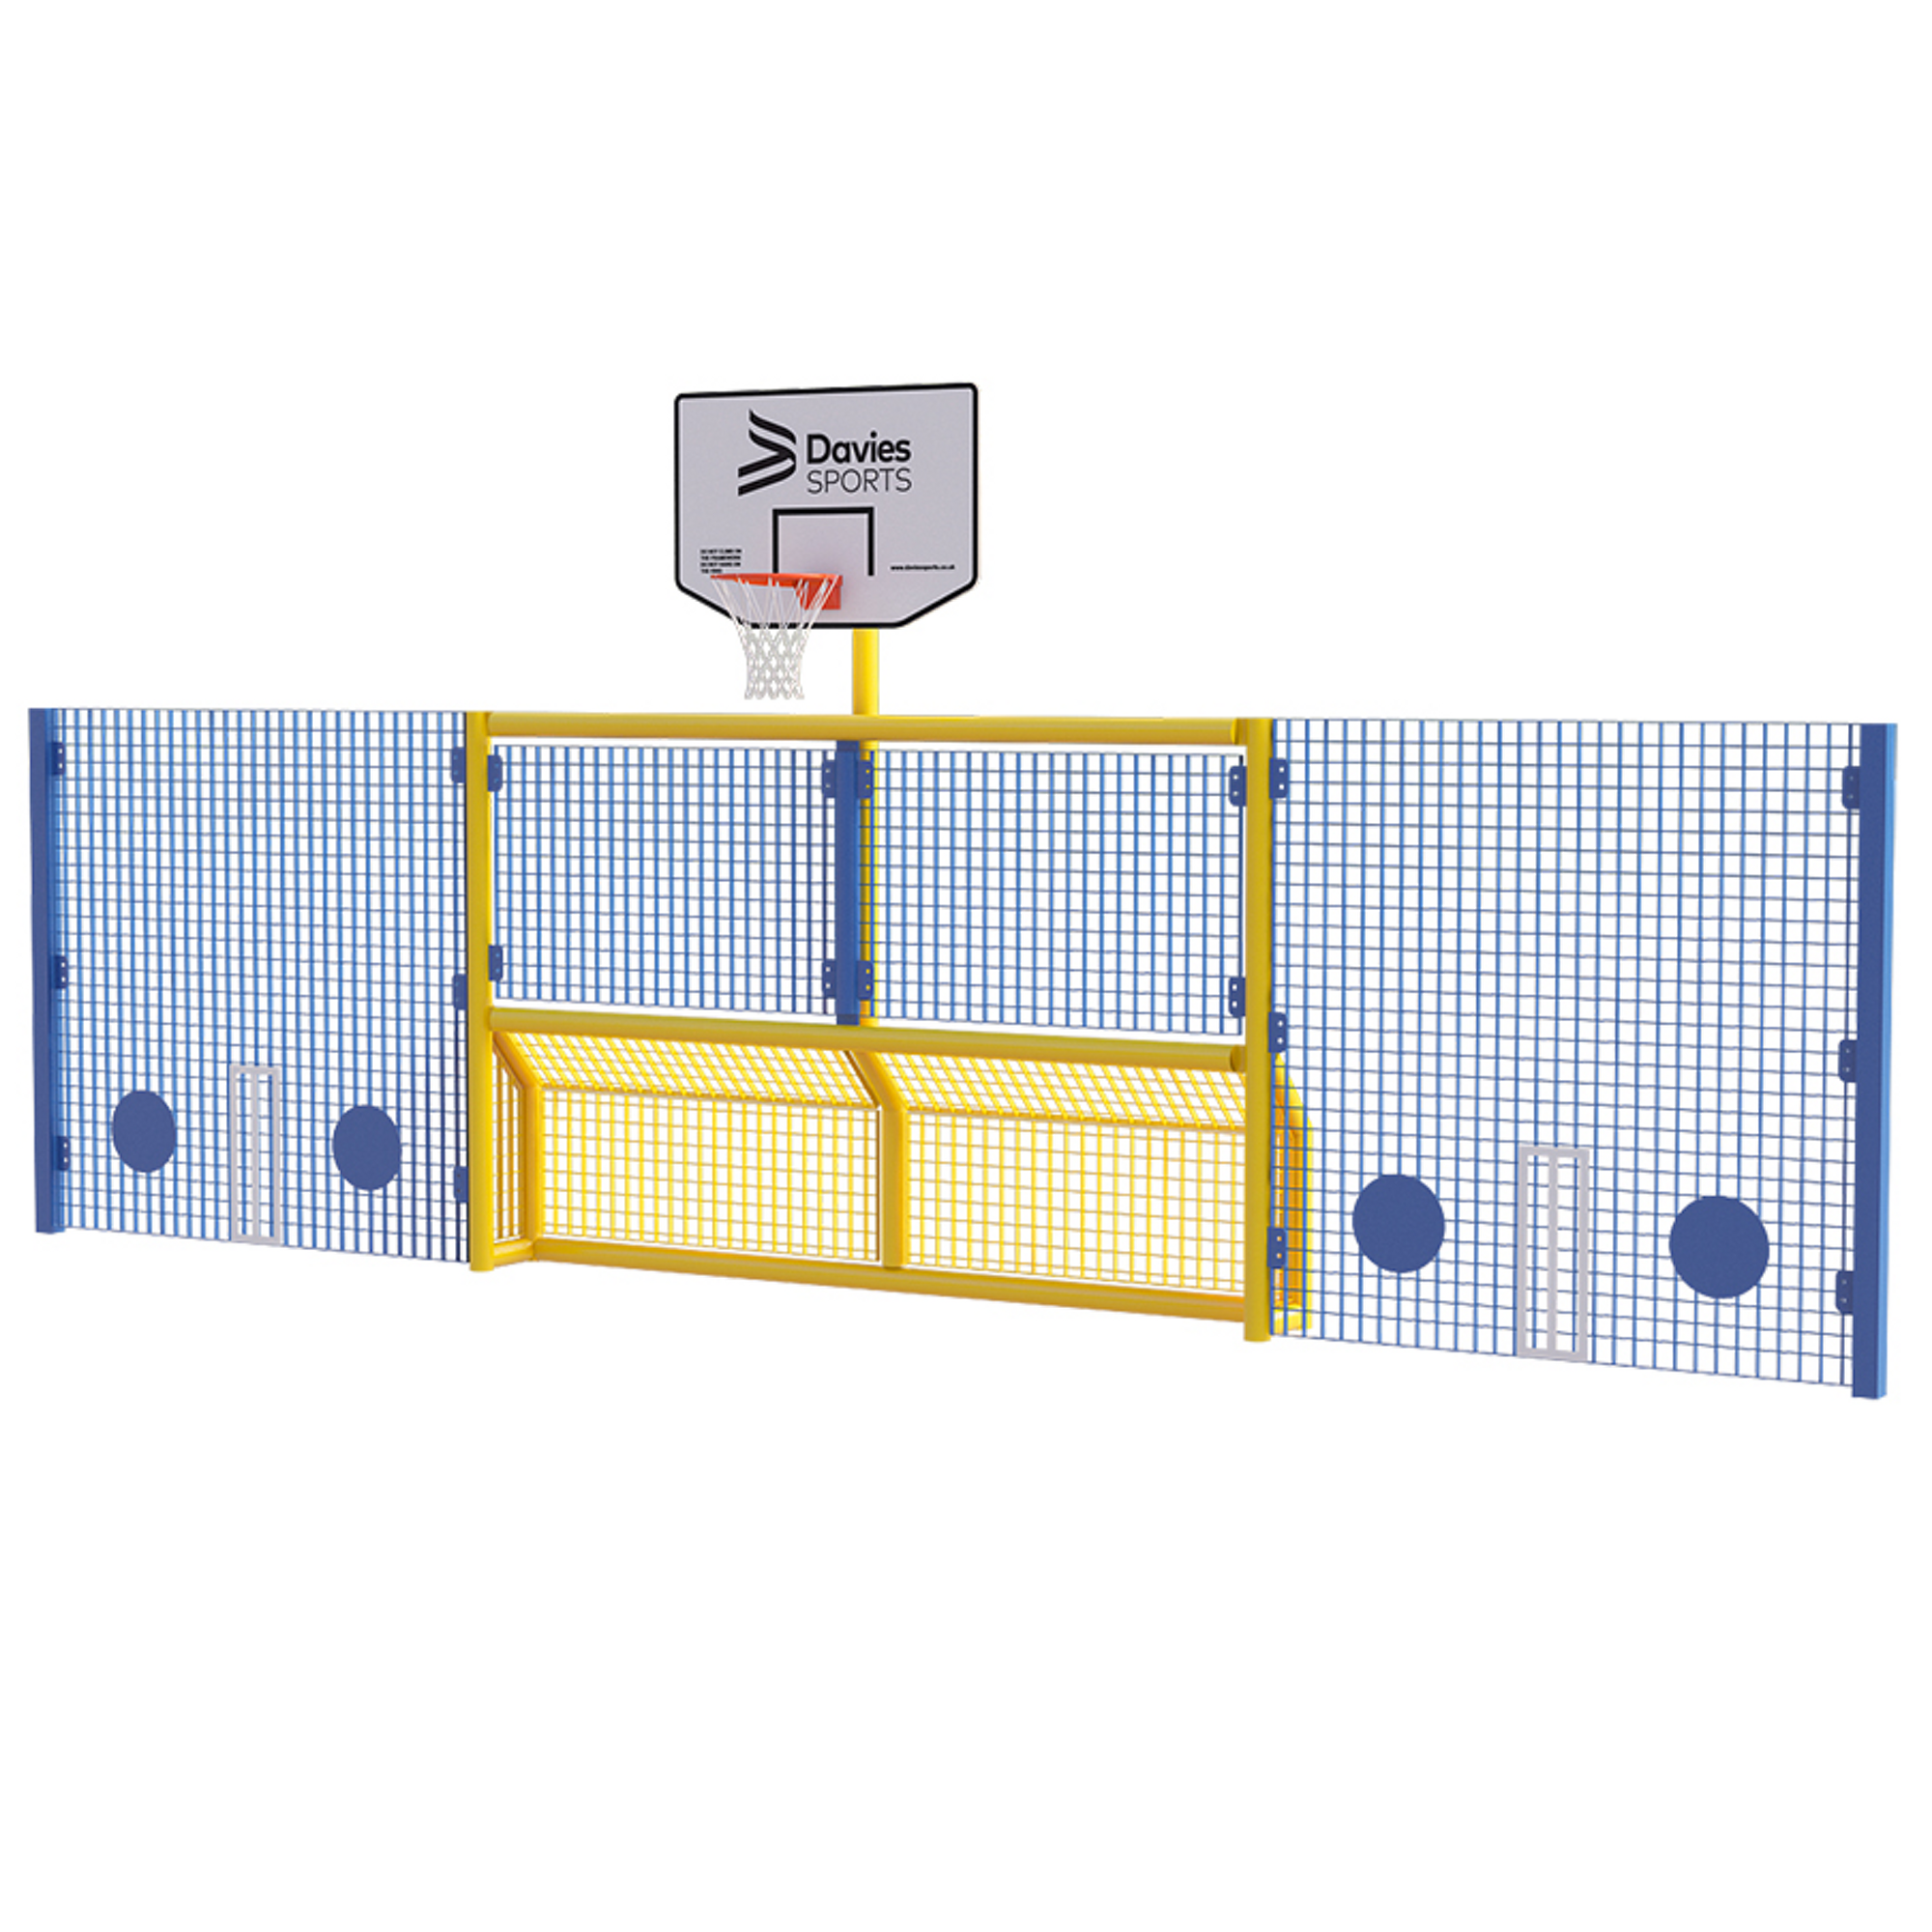 Primary High Sides Bball Yel Frame Blue